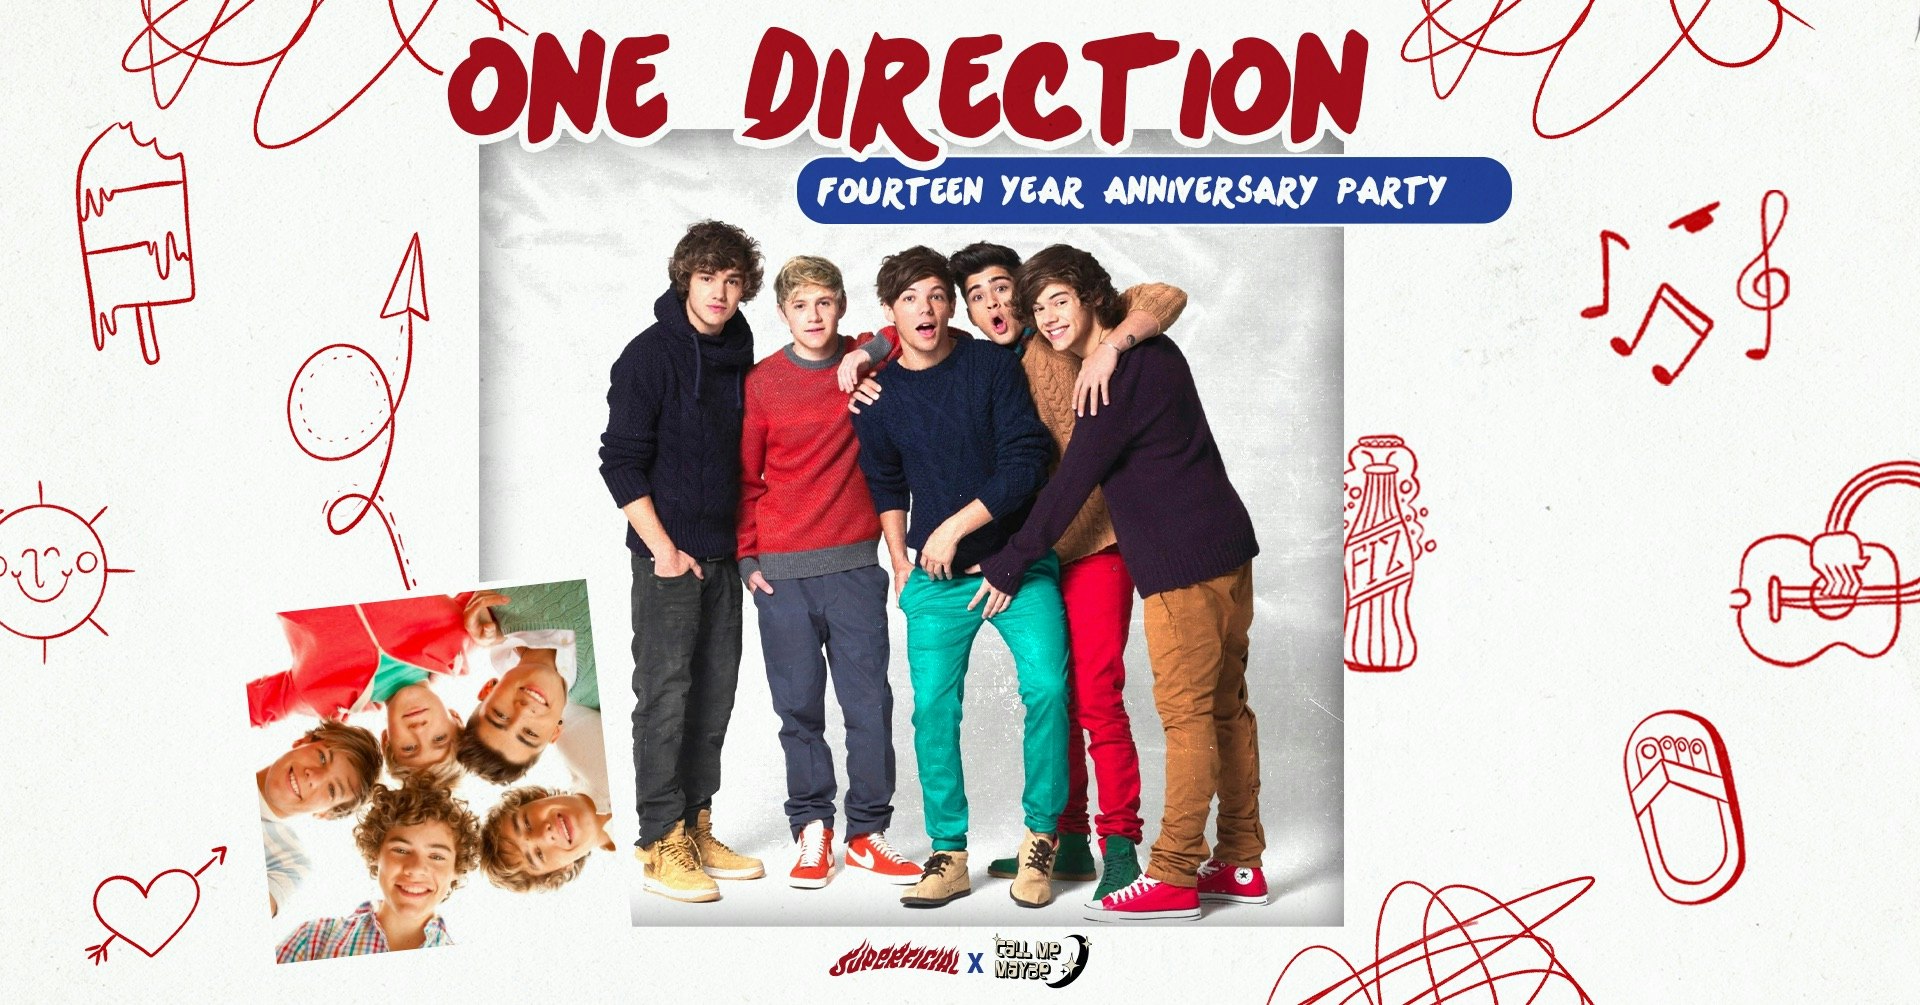 One Direction: 14th Anniversary Party